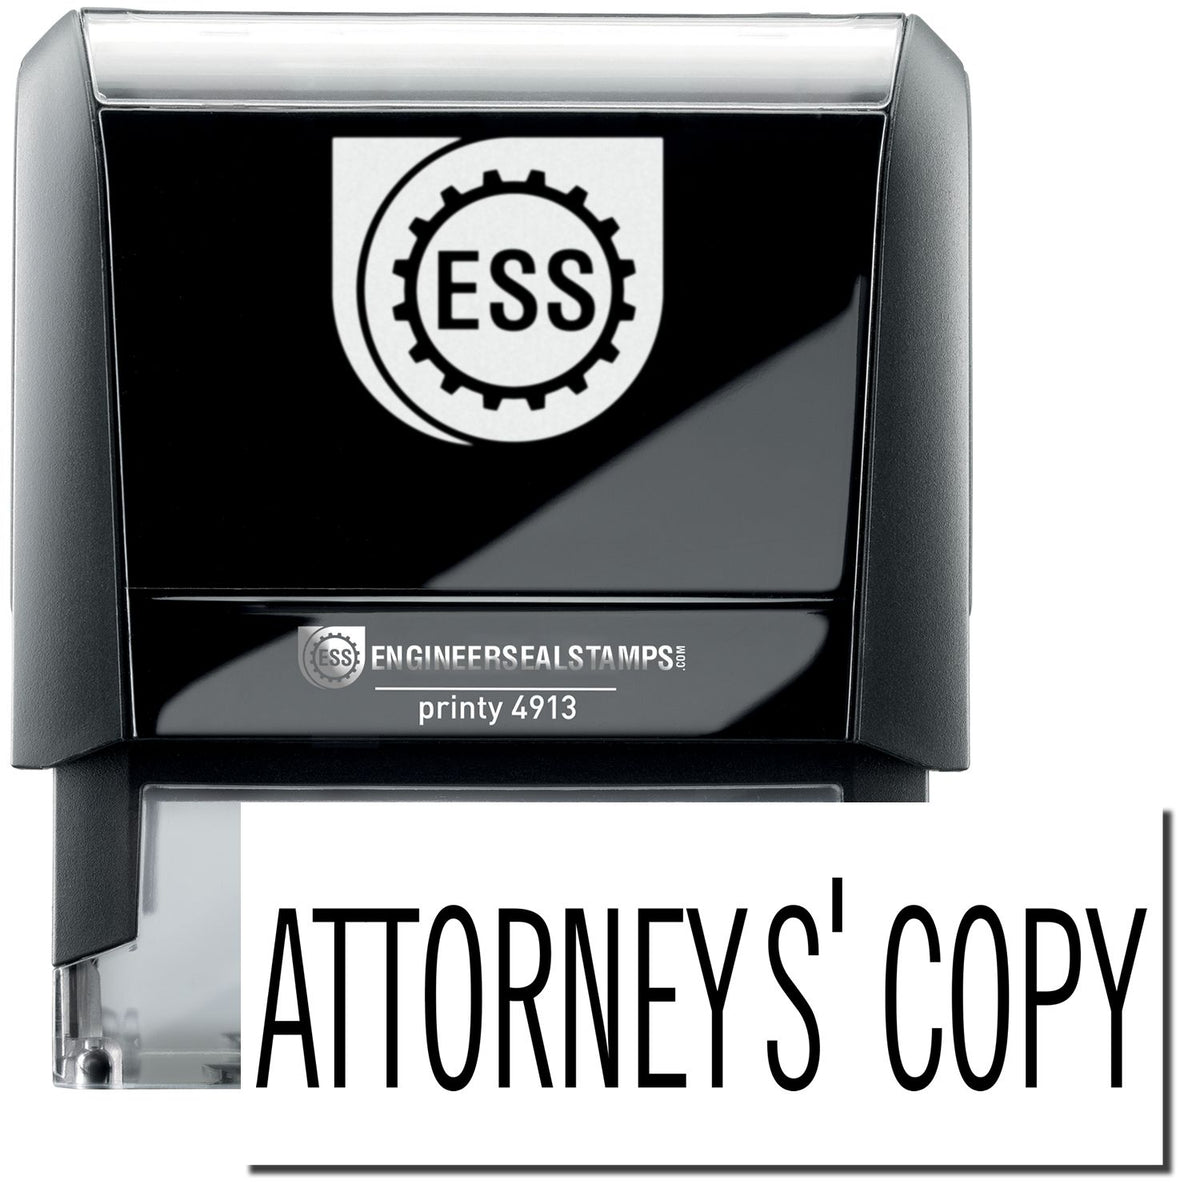 A self-inking stamp with a stamped image showing how the text &quot;ATTORNEYS&#39; COPY&quot; in a large font is displayed by it after stamping.